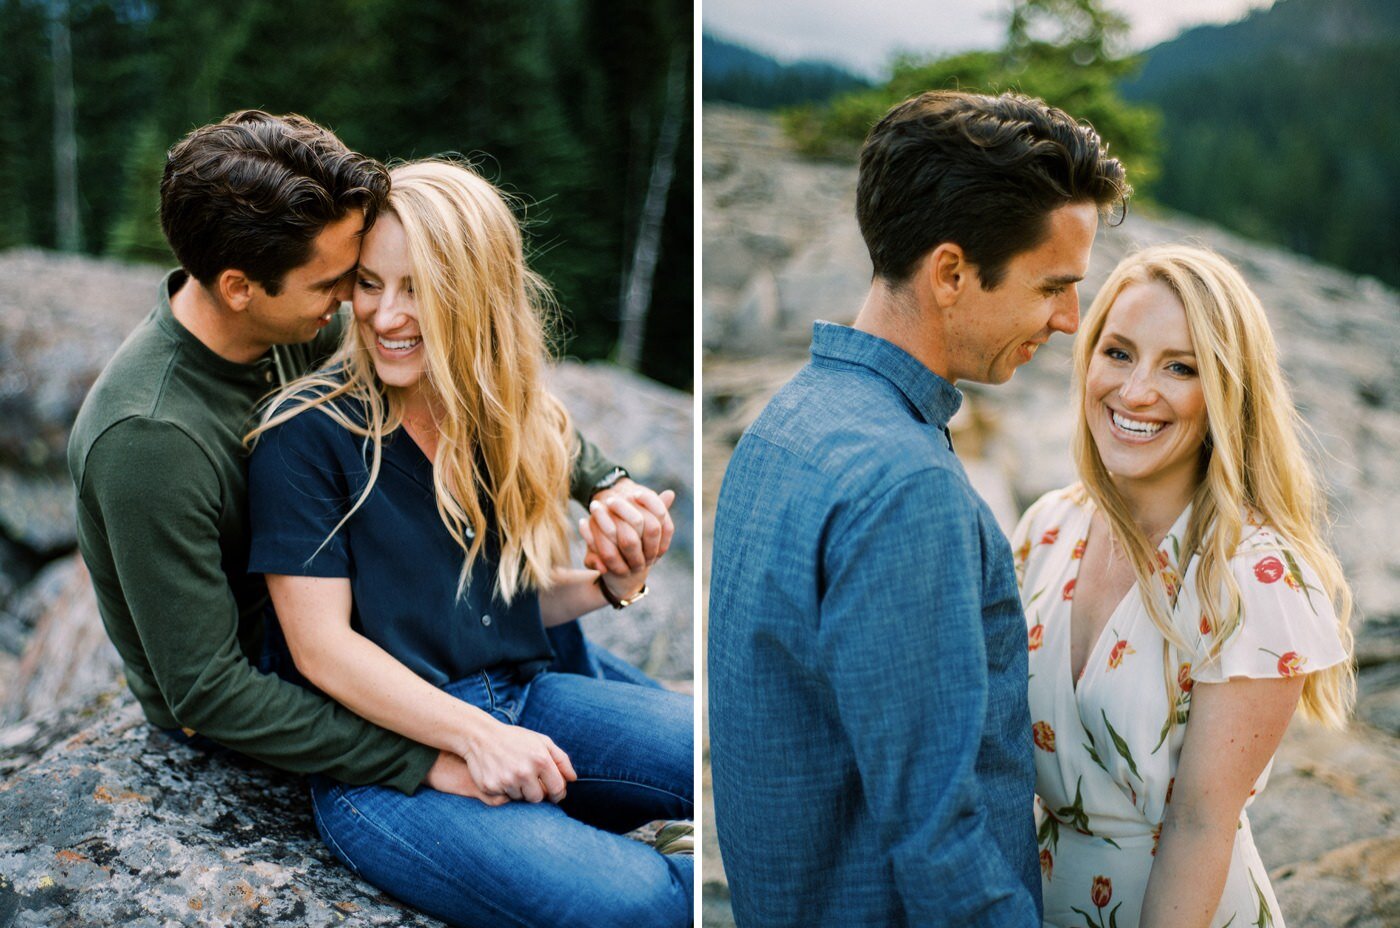 032_franklin falls and snoqualmie pass engagement session locations by ryan flynn.jpg